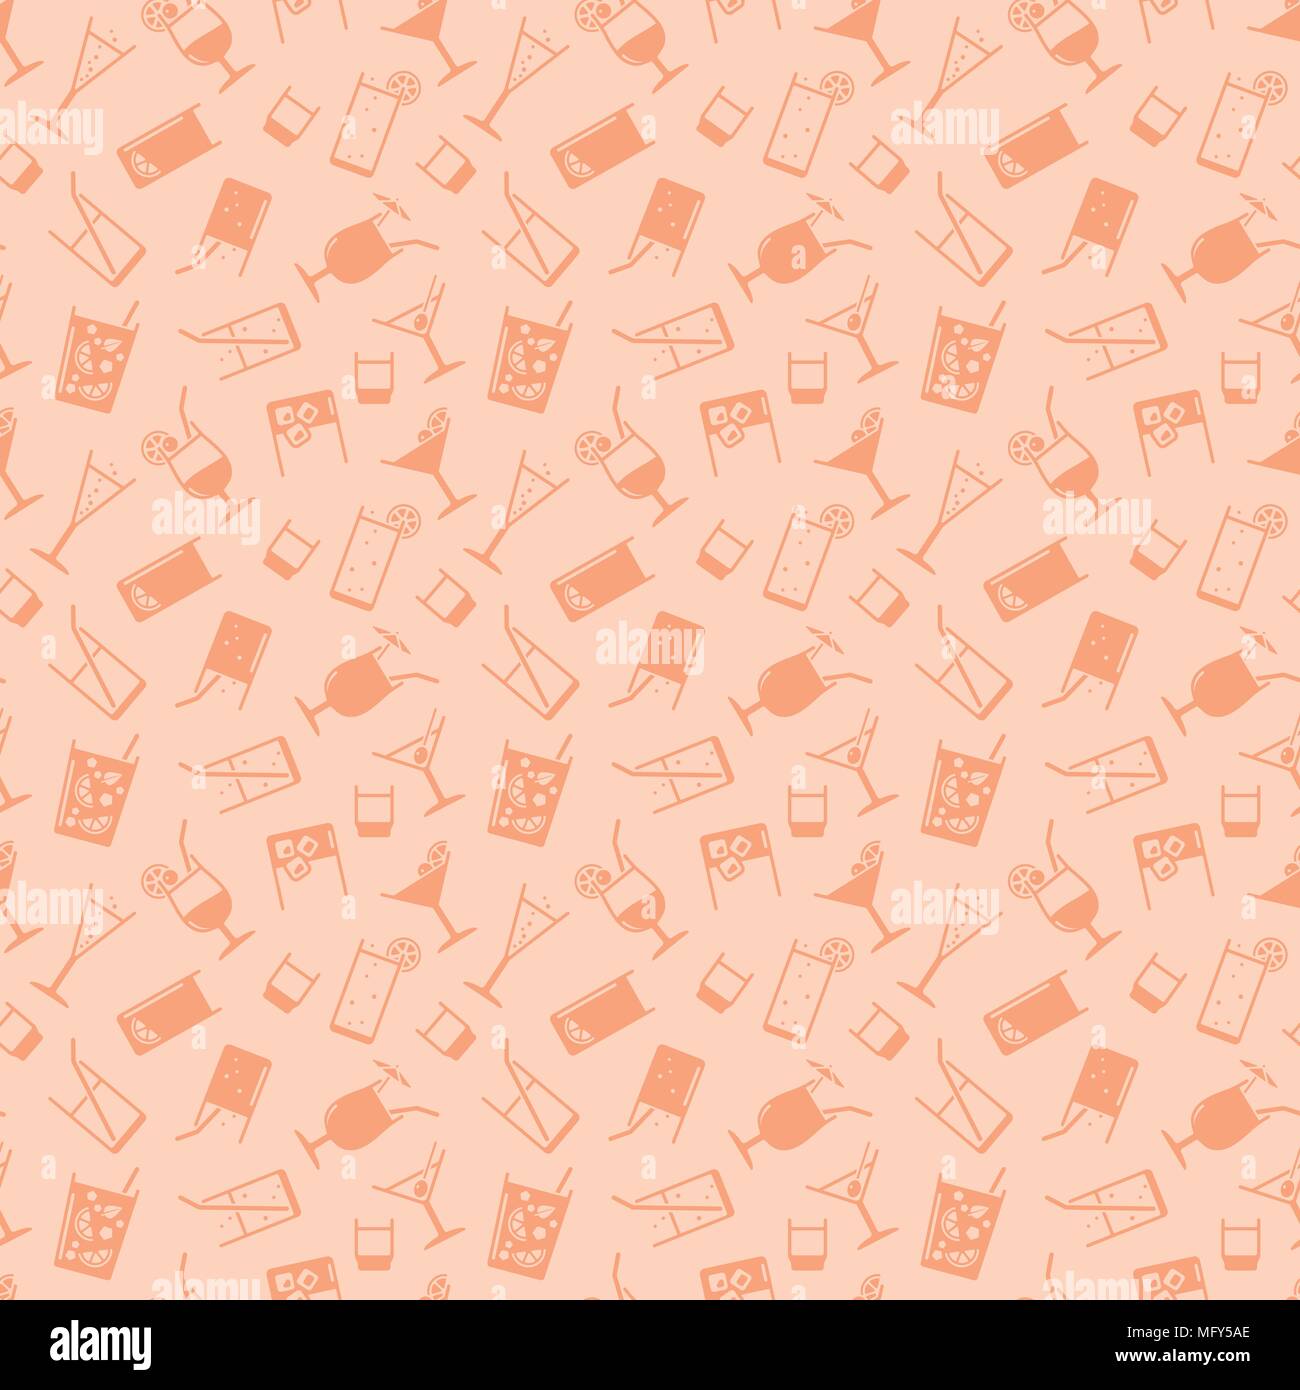 Seamless background pattern of drinks icons Stock Vector